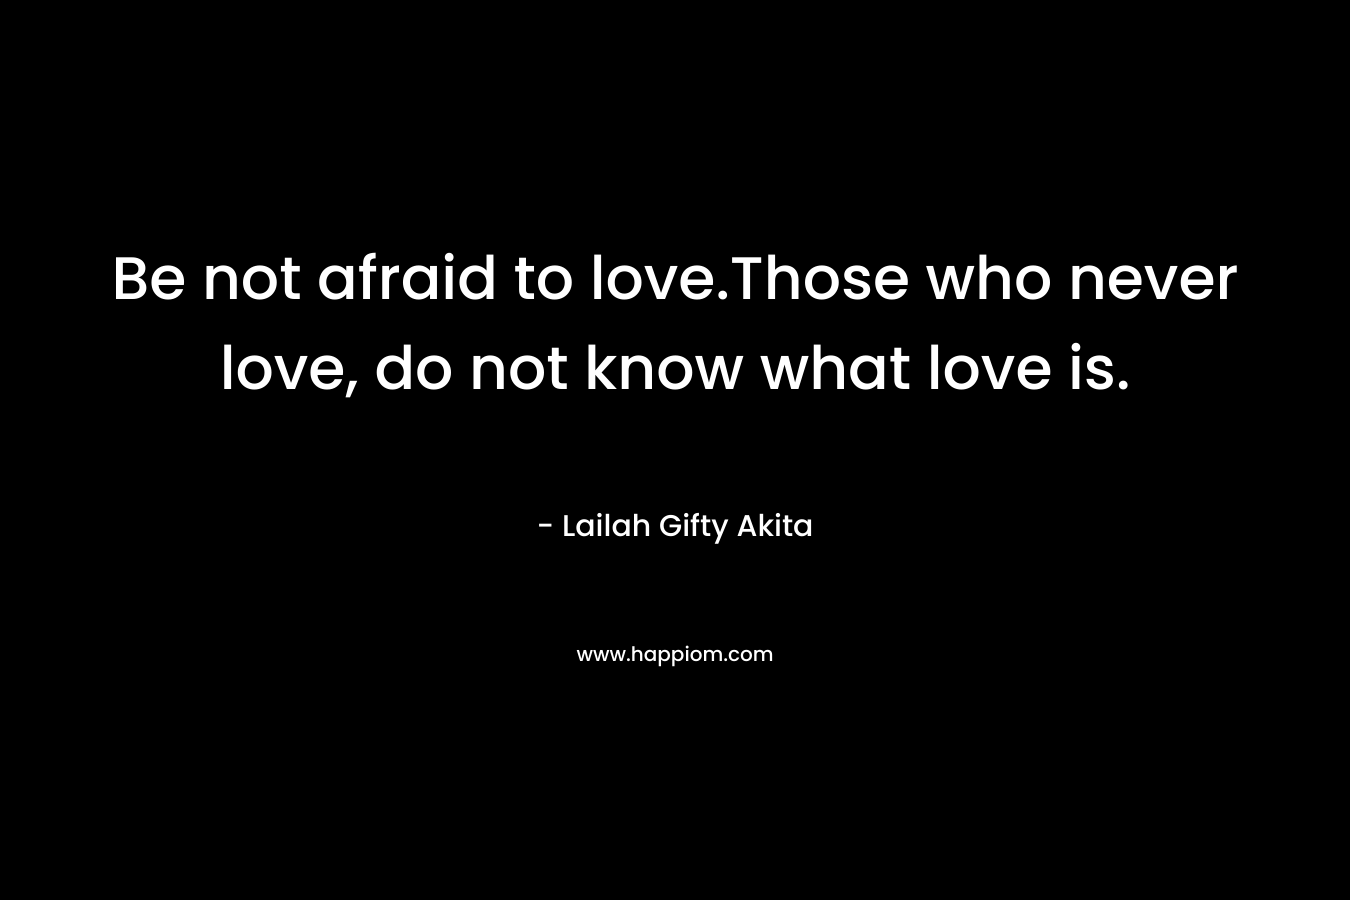 Be not afraid to love.Those who never love, do not know what love is. – Lailah Gifty Akita